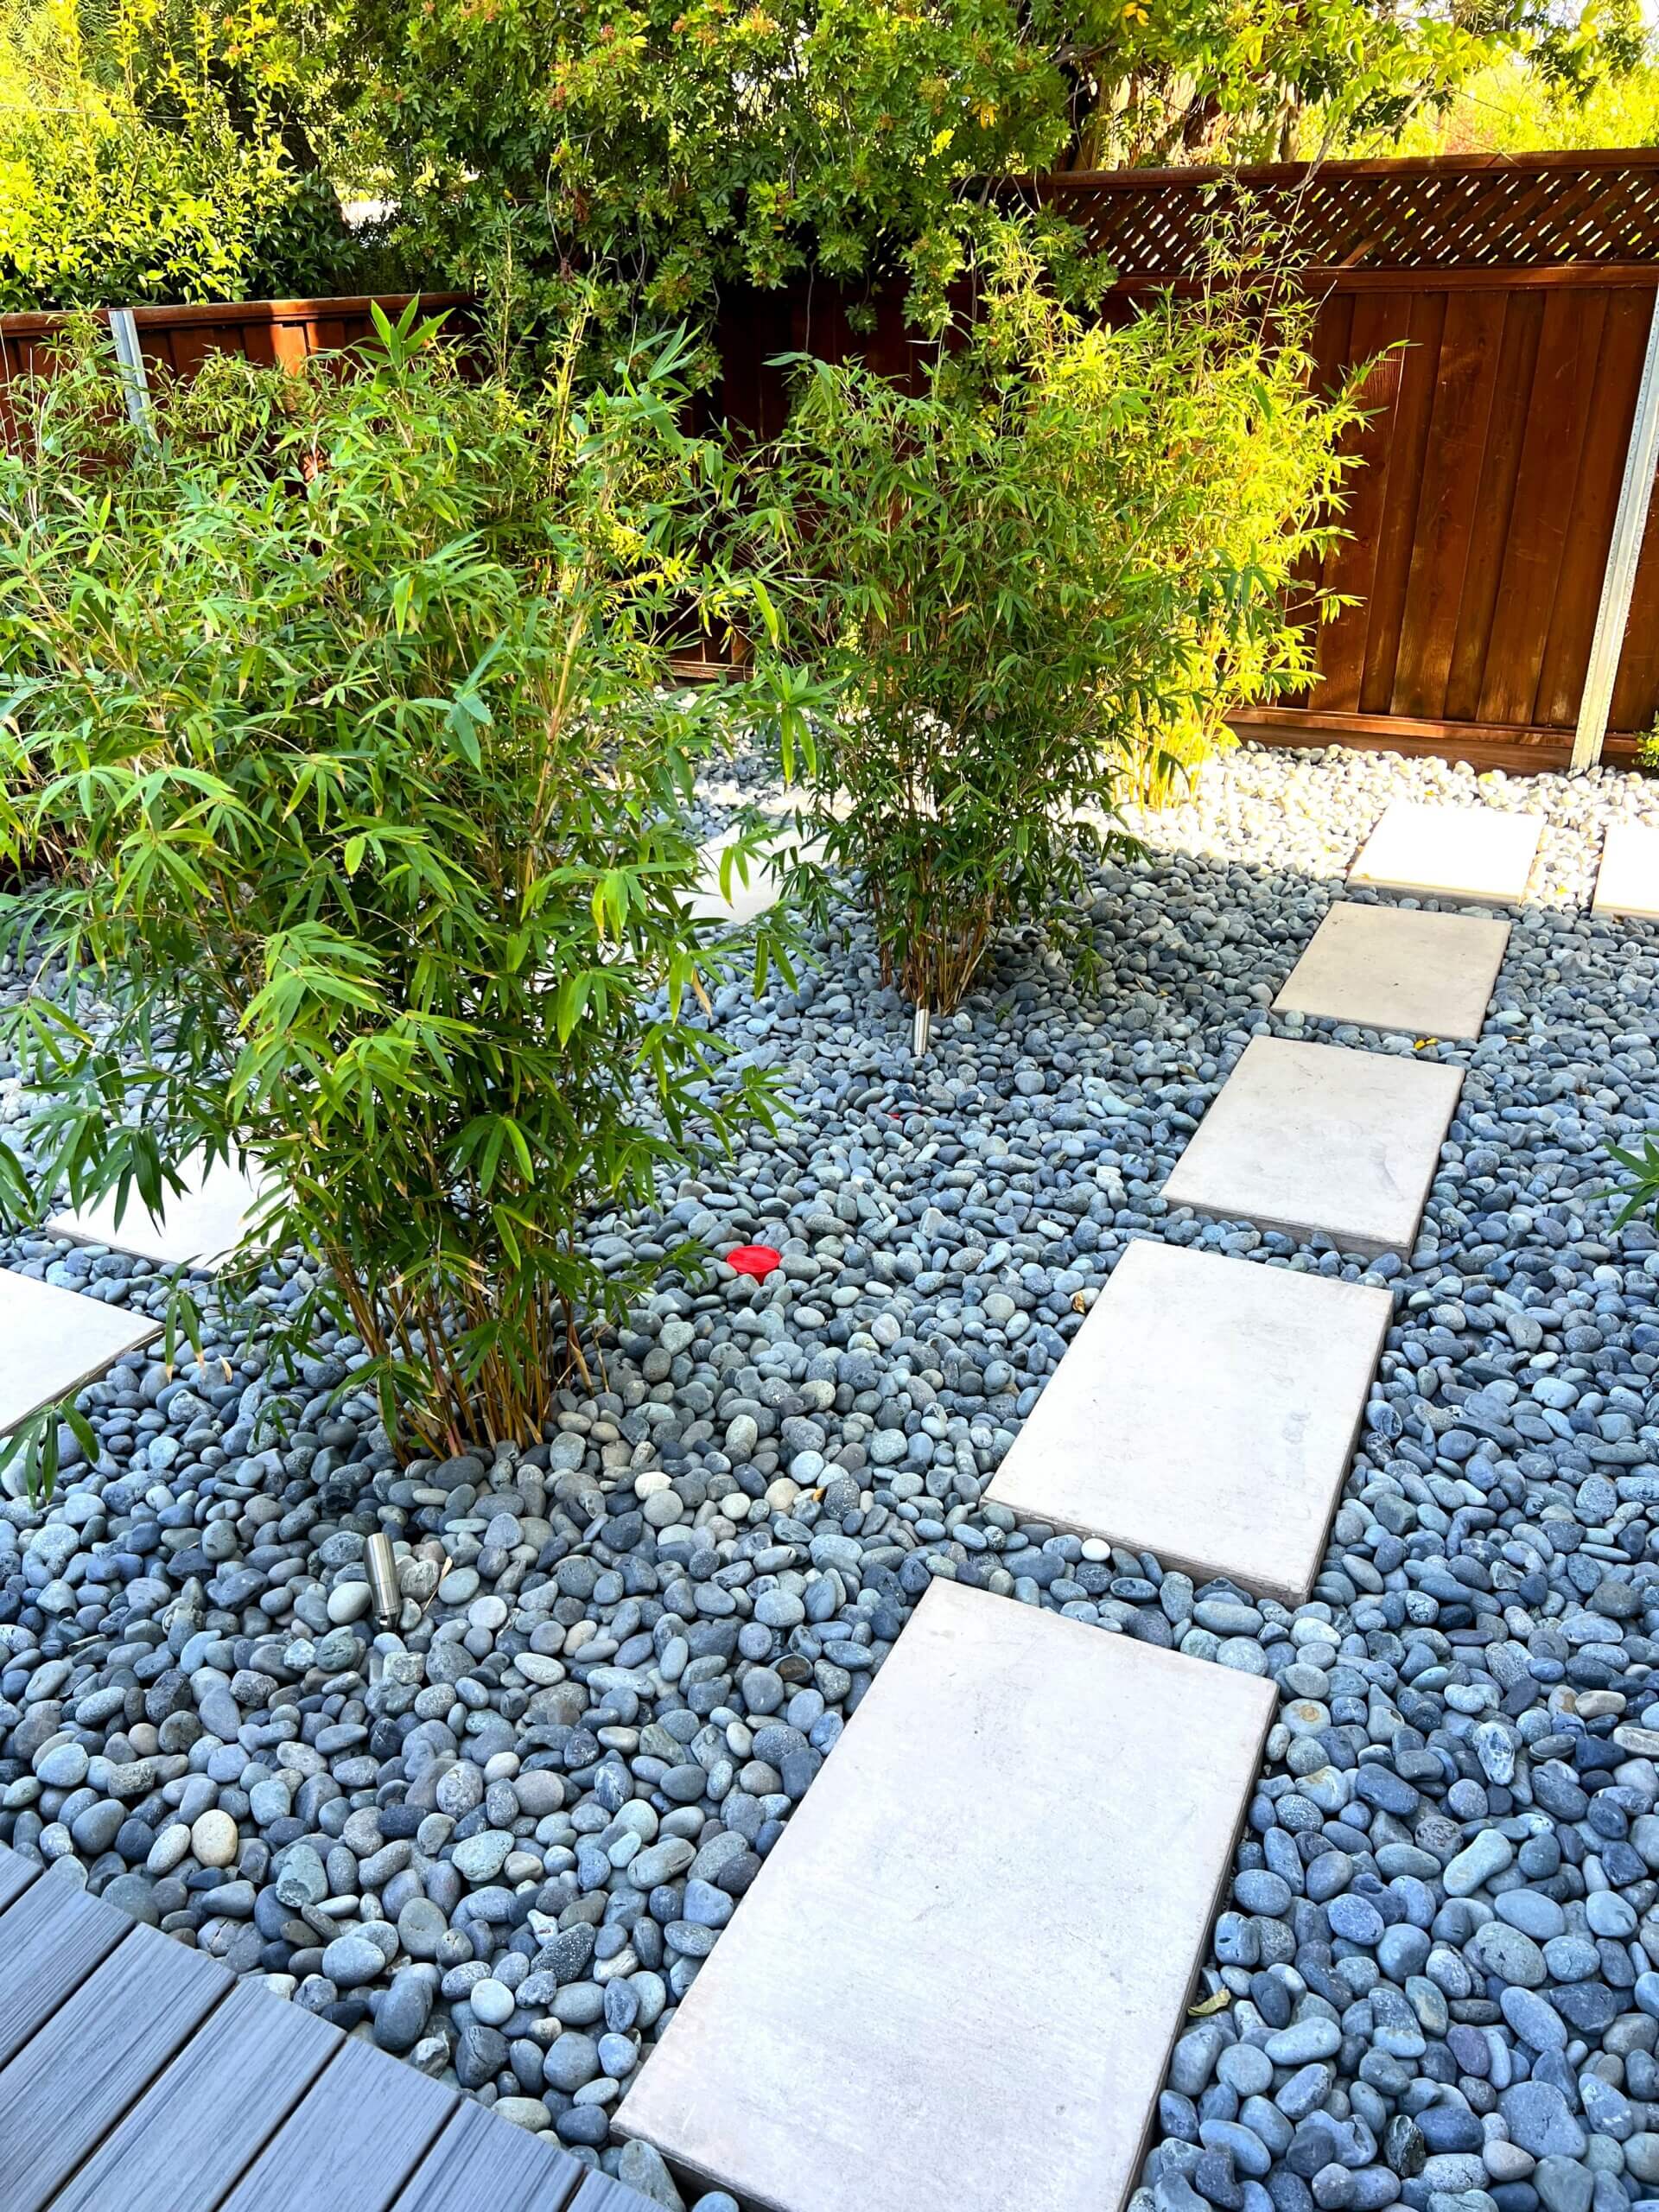 New bamboo plantings and flagstone hardscaping for Eichler home landscape remodel